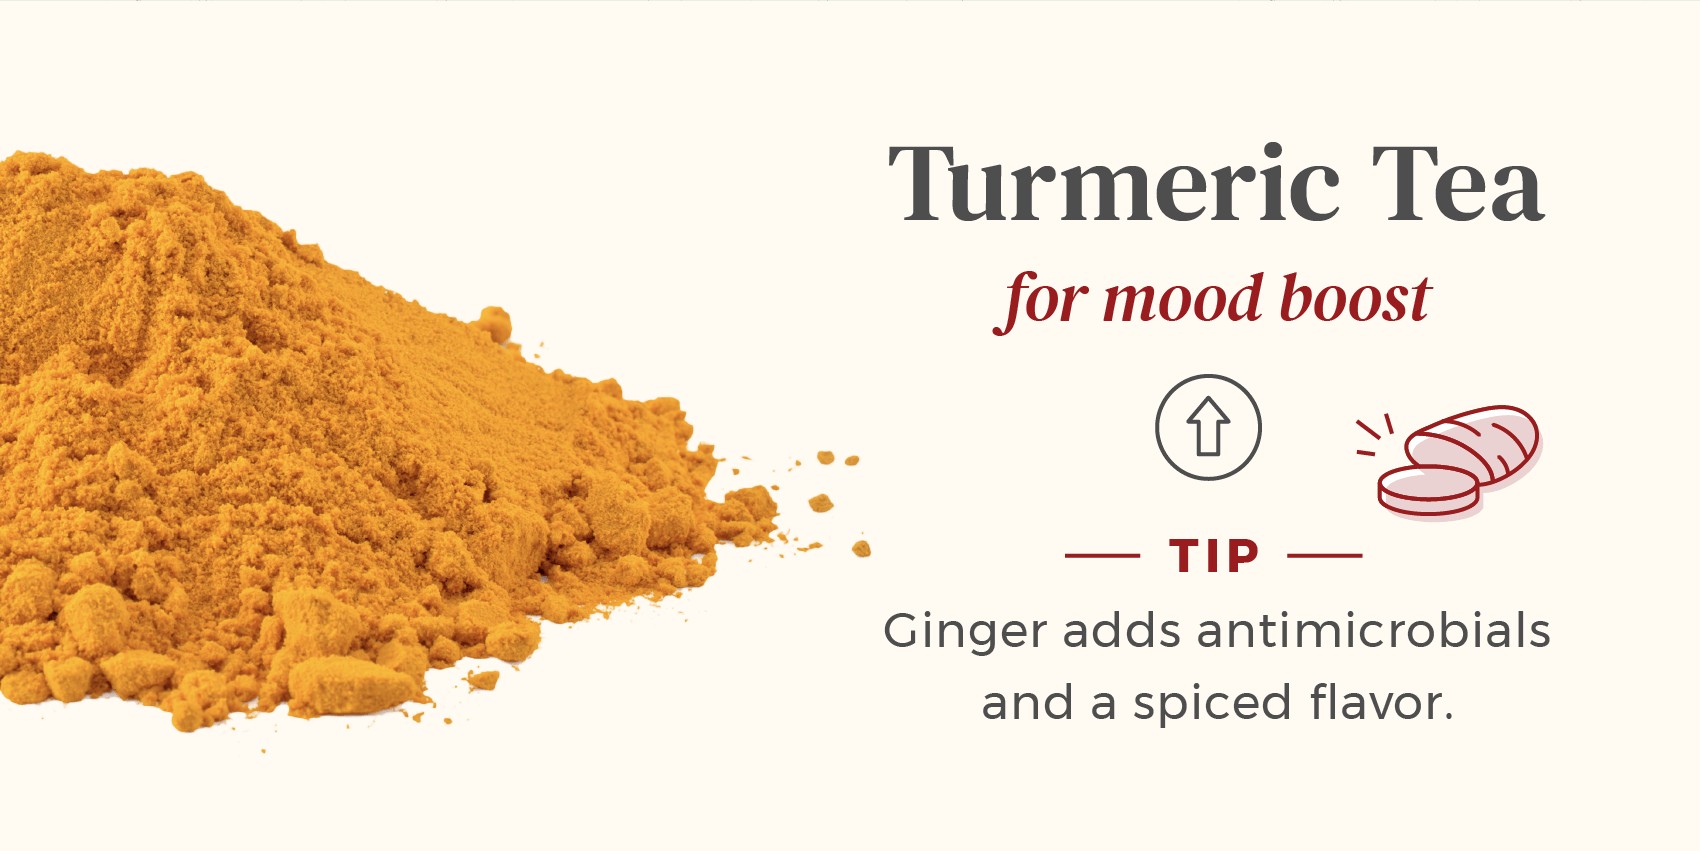 Pile of loose turmeric tea used for a mood boost, add ginger for best effects.